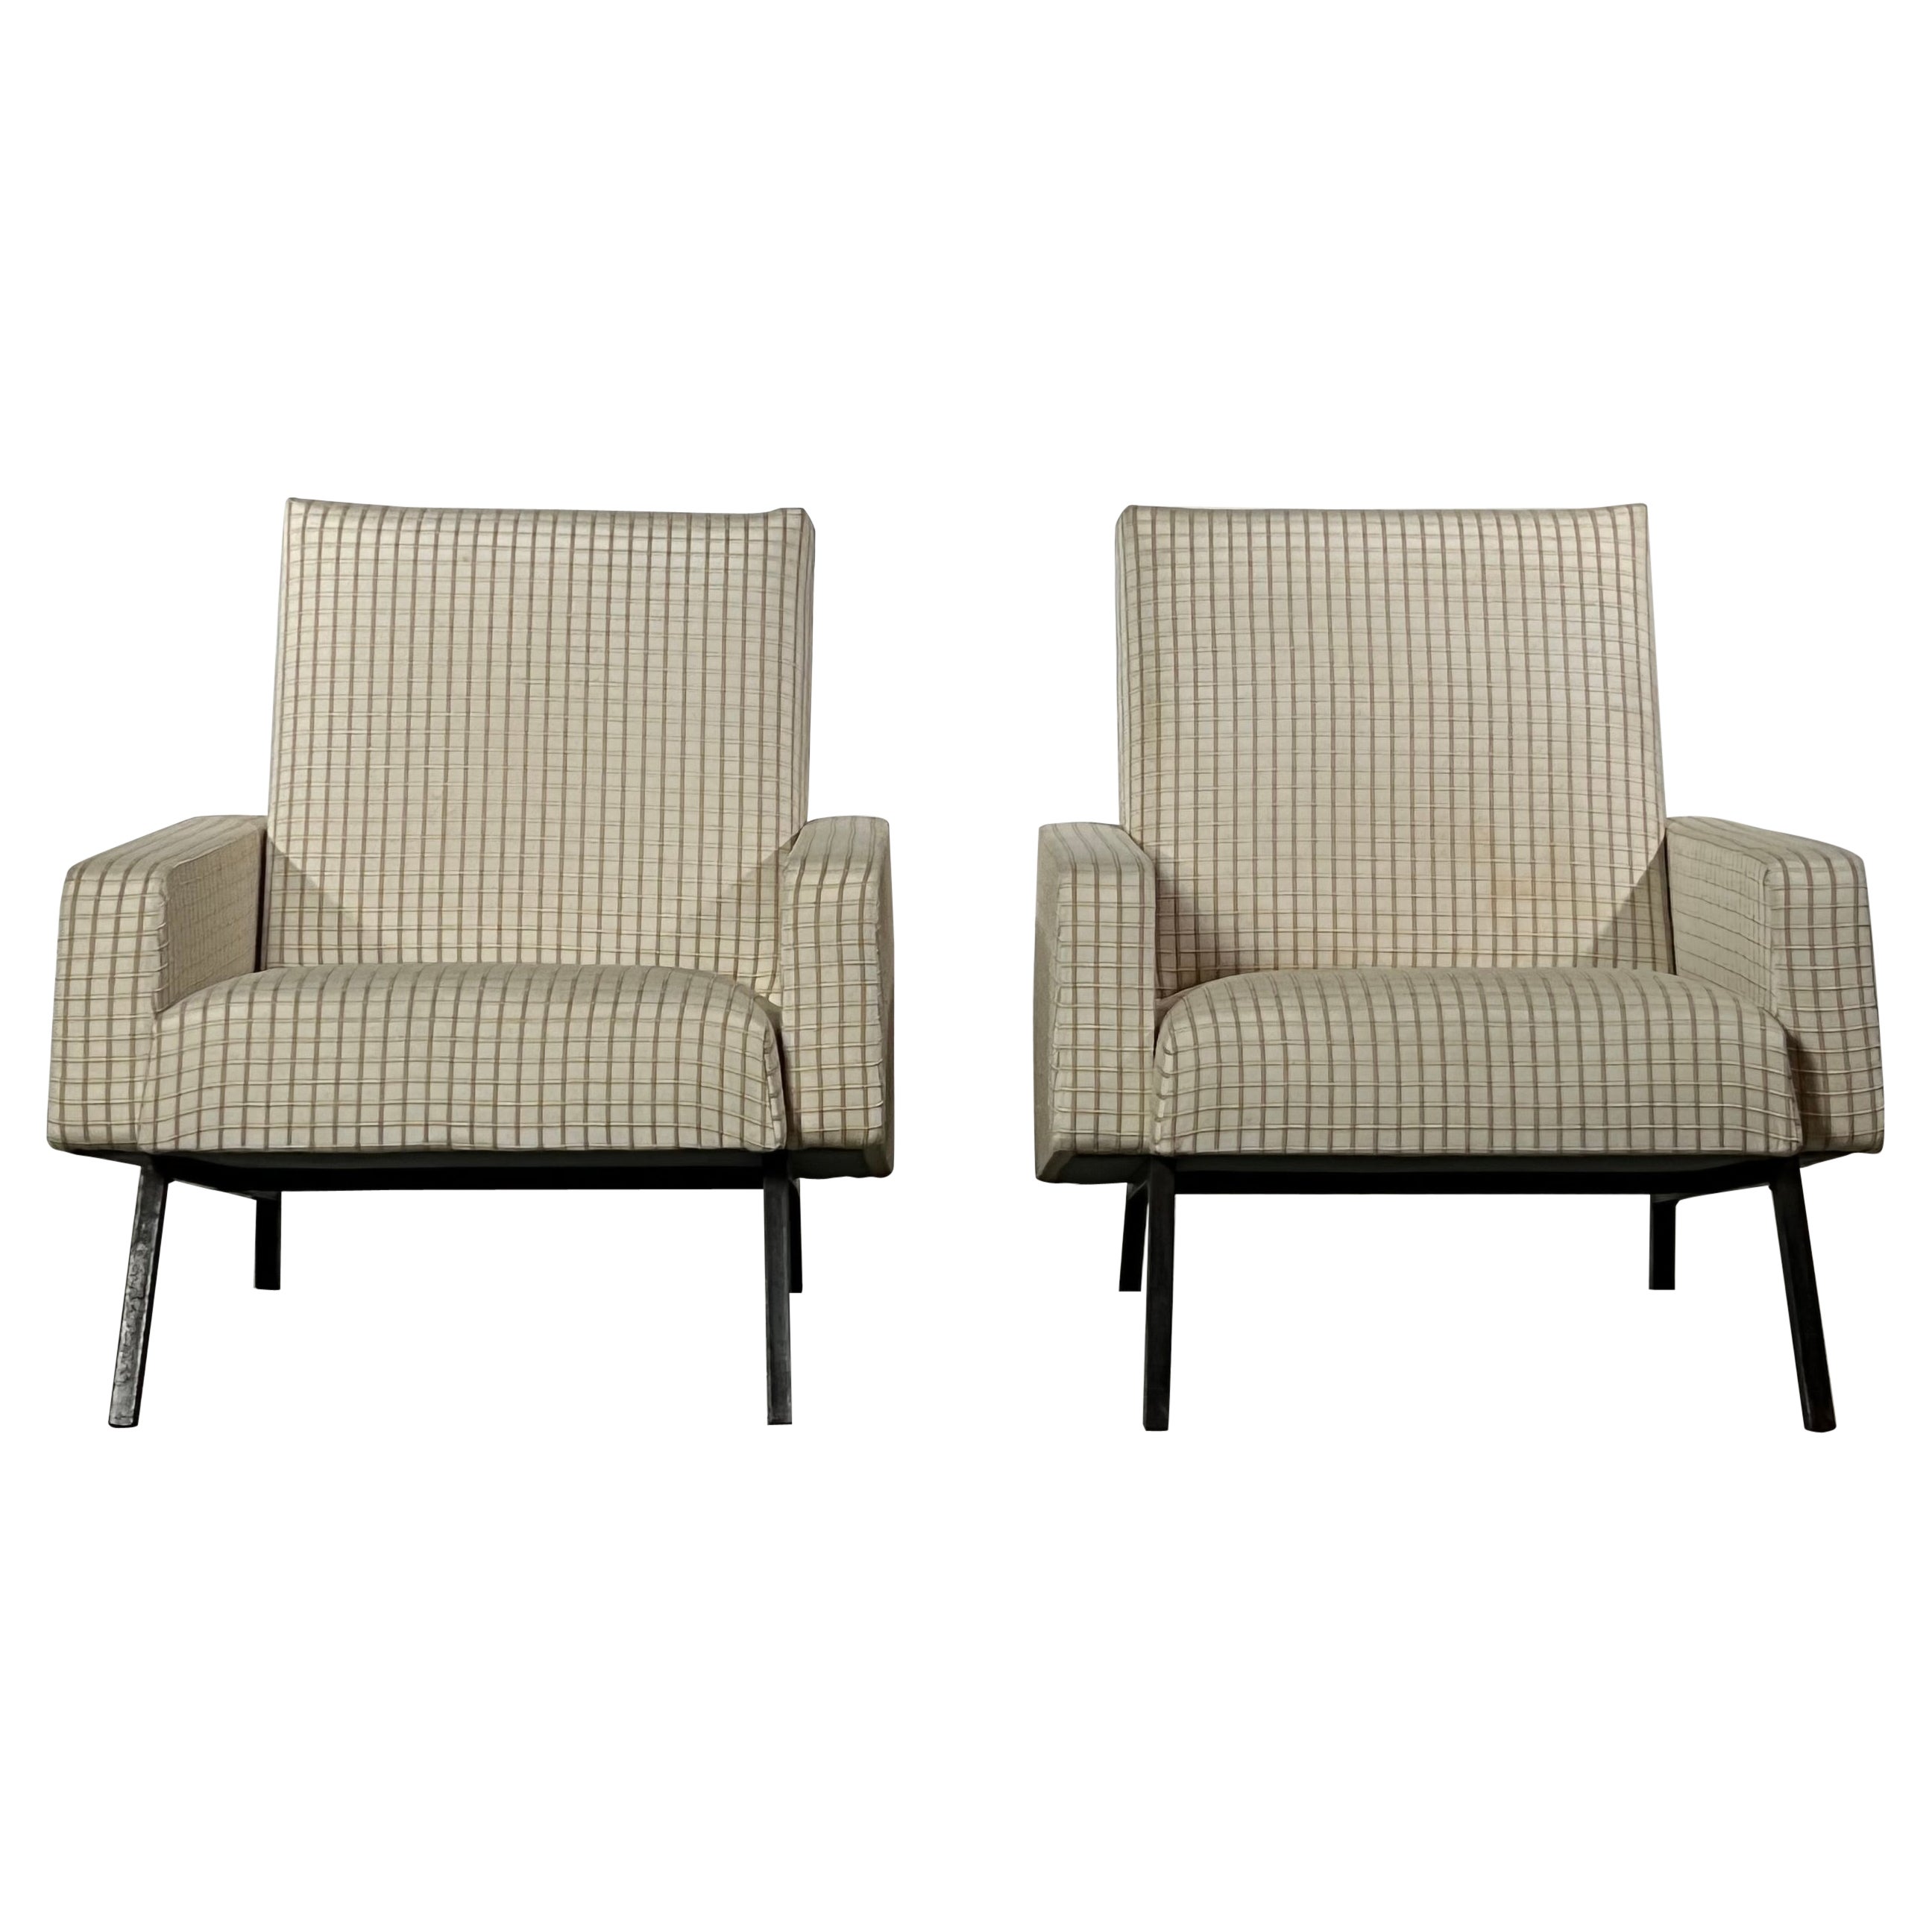 Pair of 1950s Checkered Armchairs